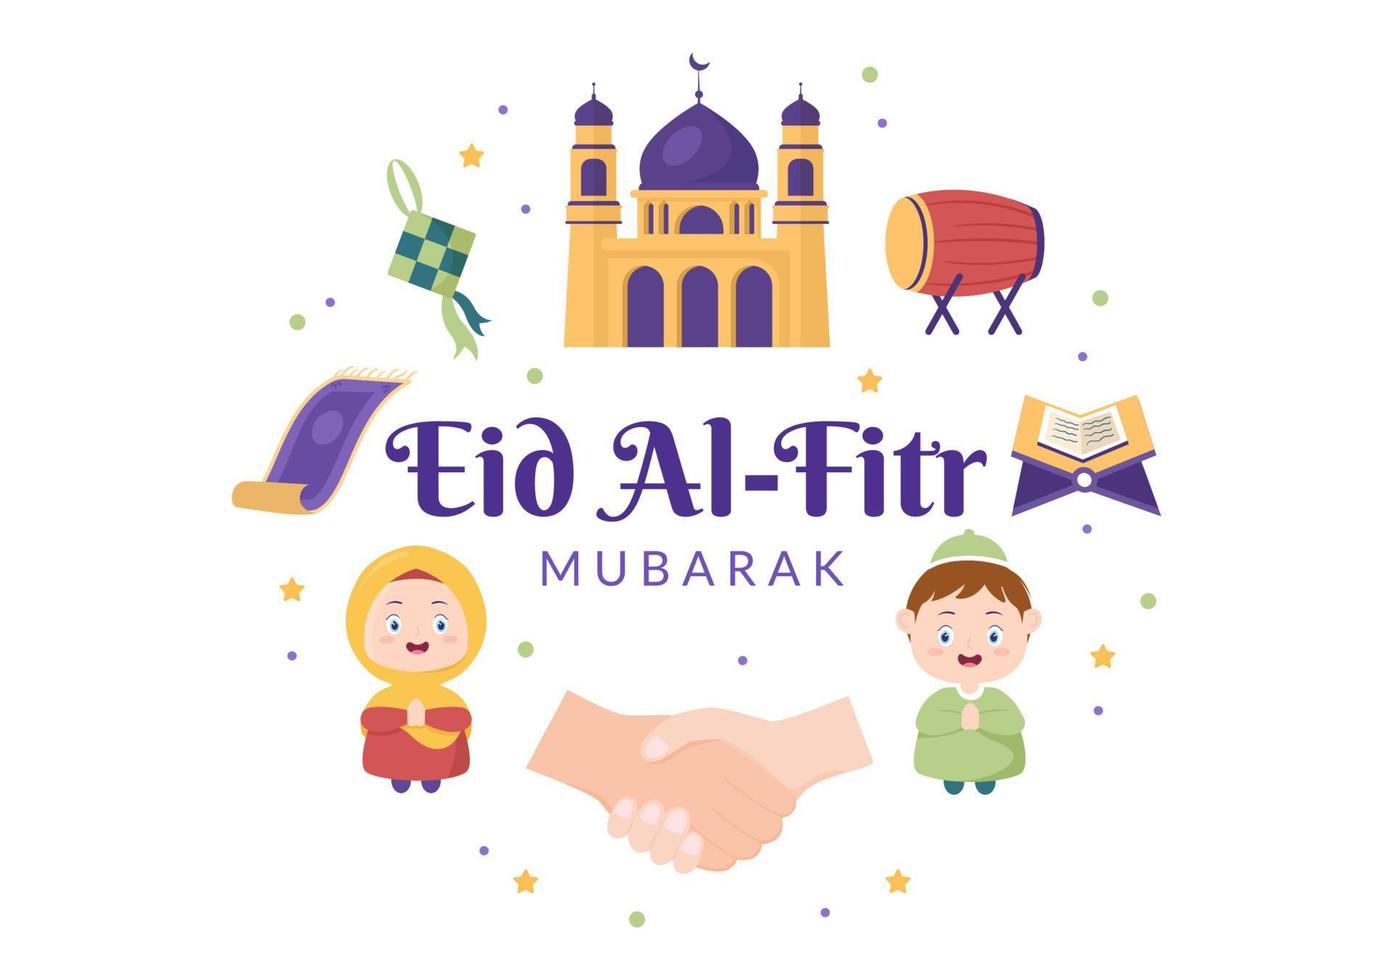 Happy Eid ul-Fitr Mubarak Cartoon Background Illustration with Pictures of Mosques, Ketupat, Bedug, and Others Suitable for Posters vector